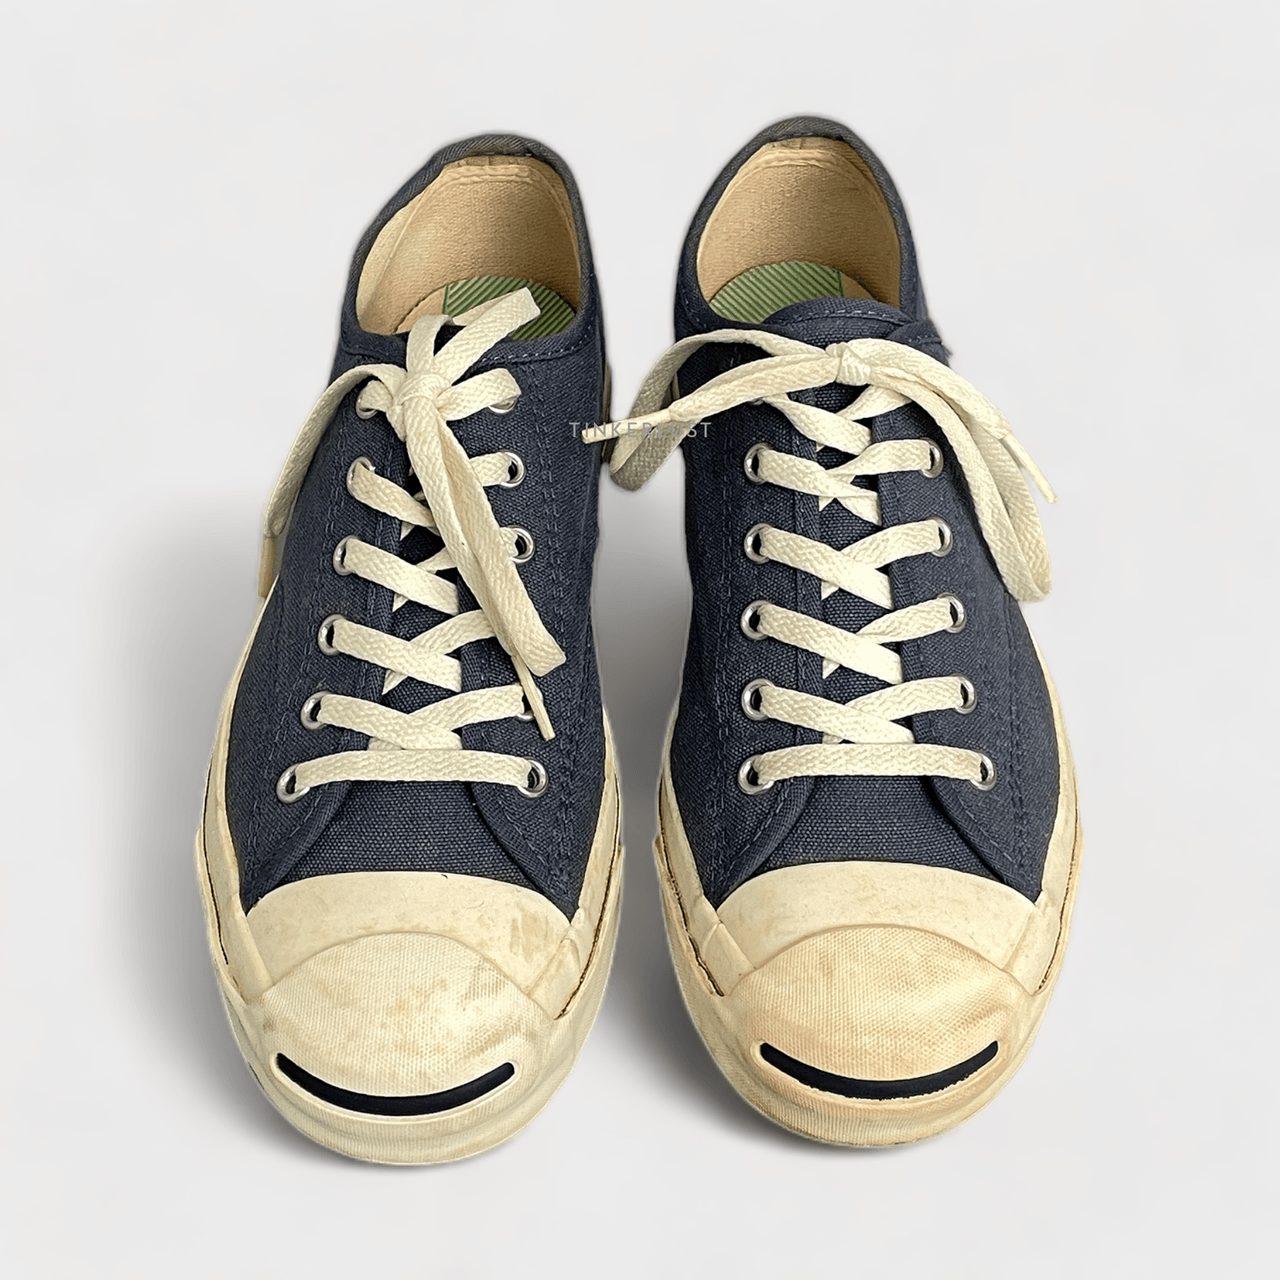 Converse jack Purcell Blue Sneakers